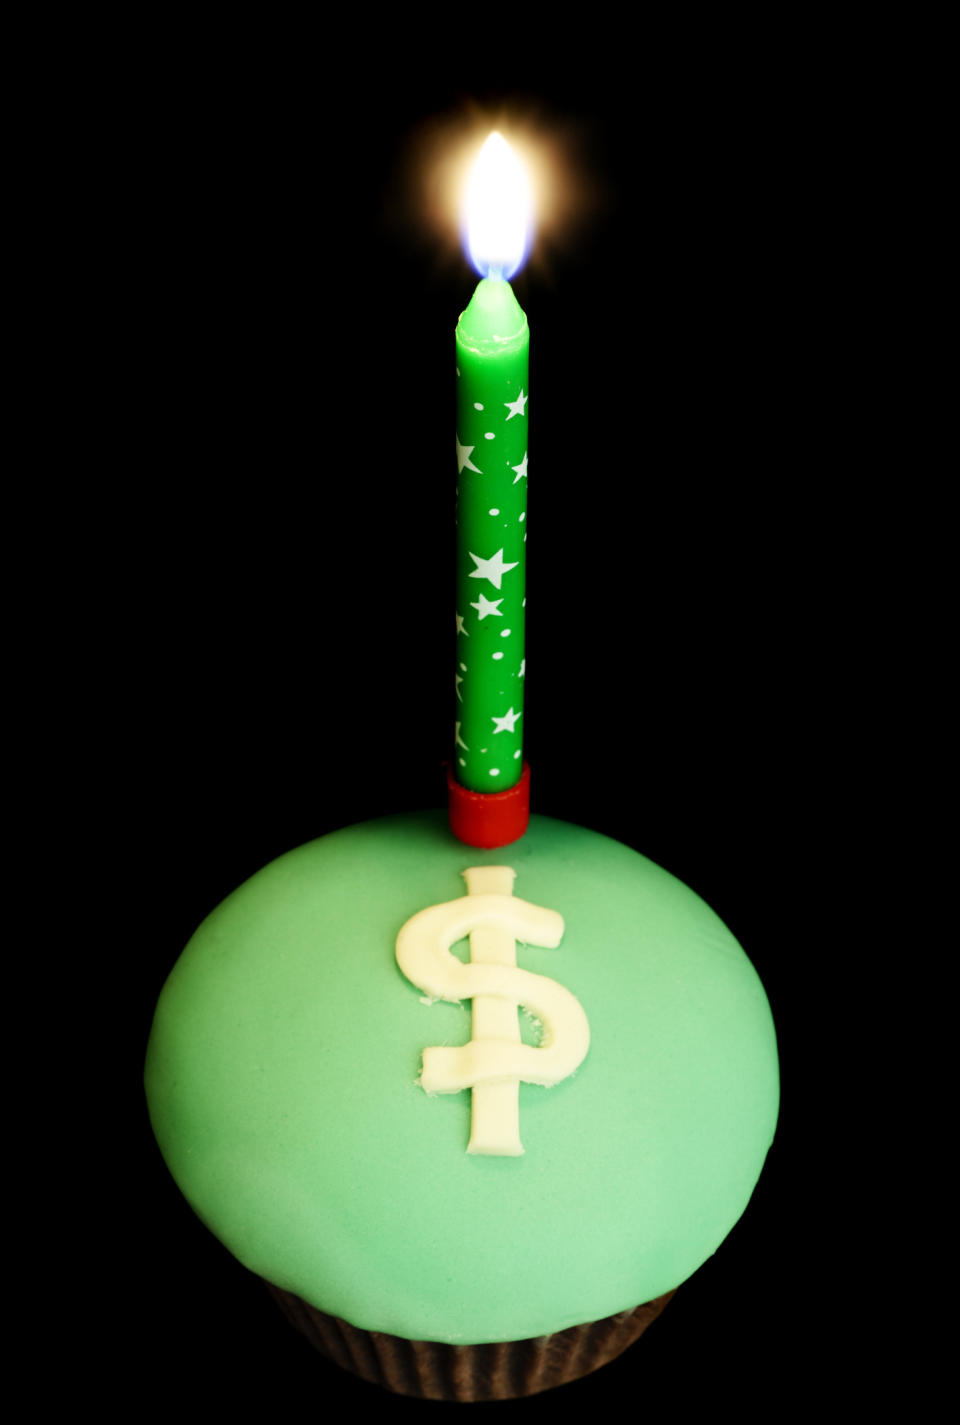 lit candle on a cupcake that has a dollar sign written in icing